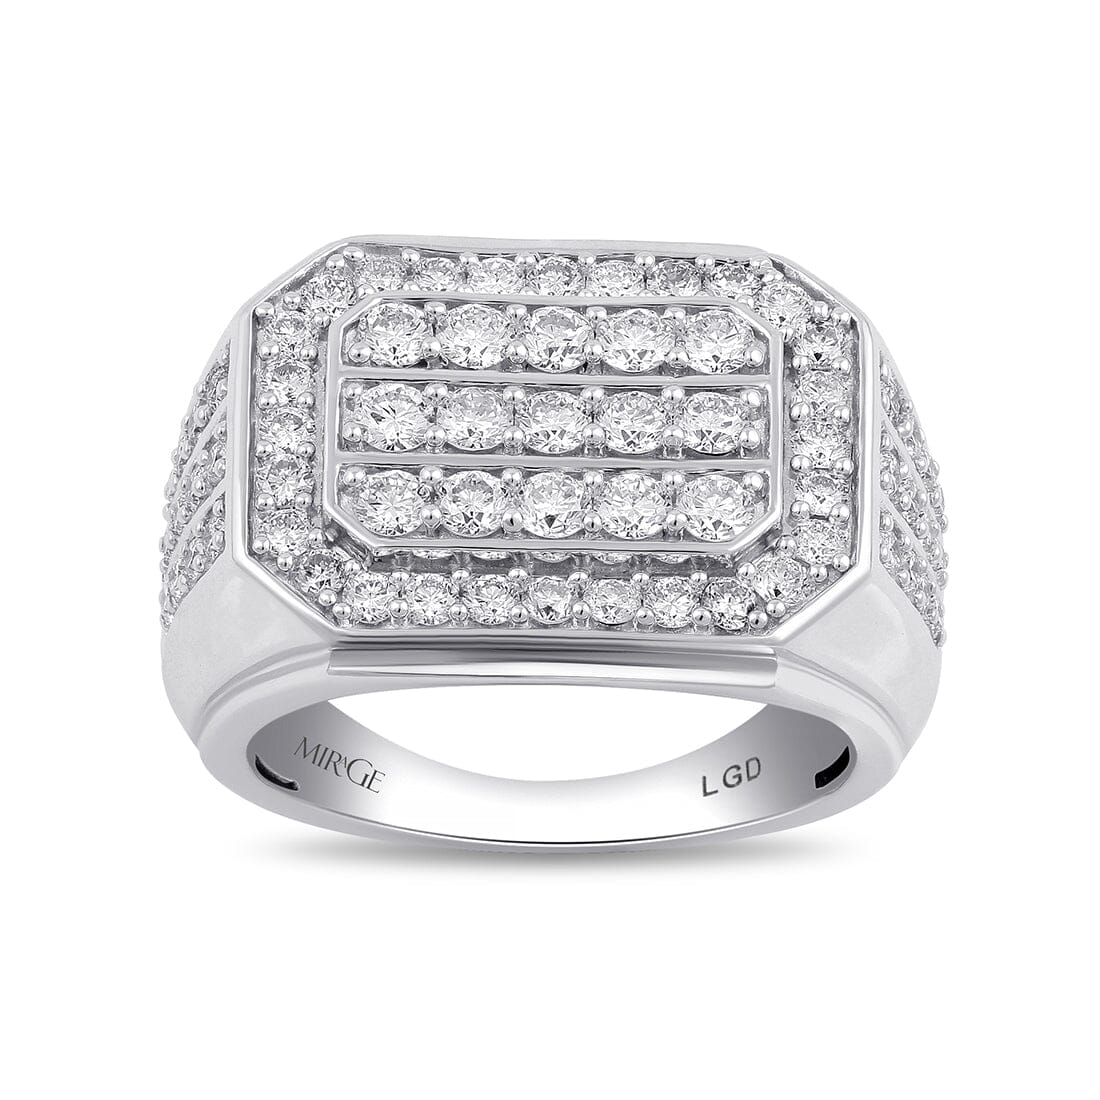 Men's Fancy Flat Top Ring with 2.00ct of Laboratory Grown Diamonds in Mirage Sterling Silver and Platinum Rings Bevilles 